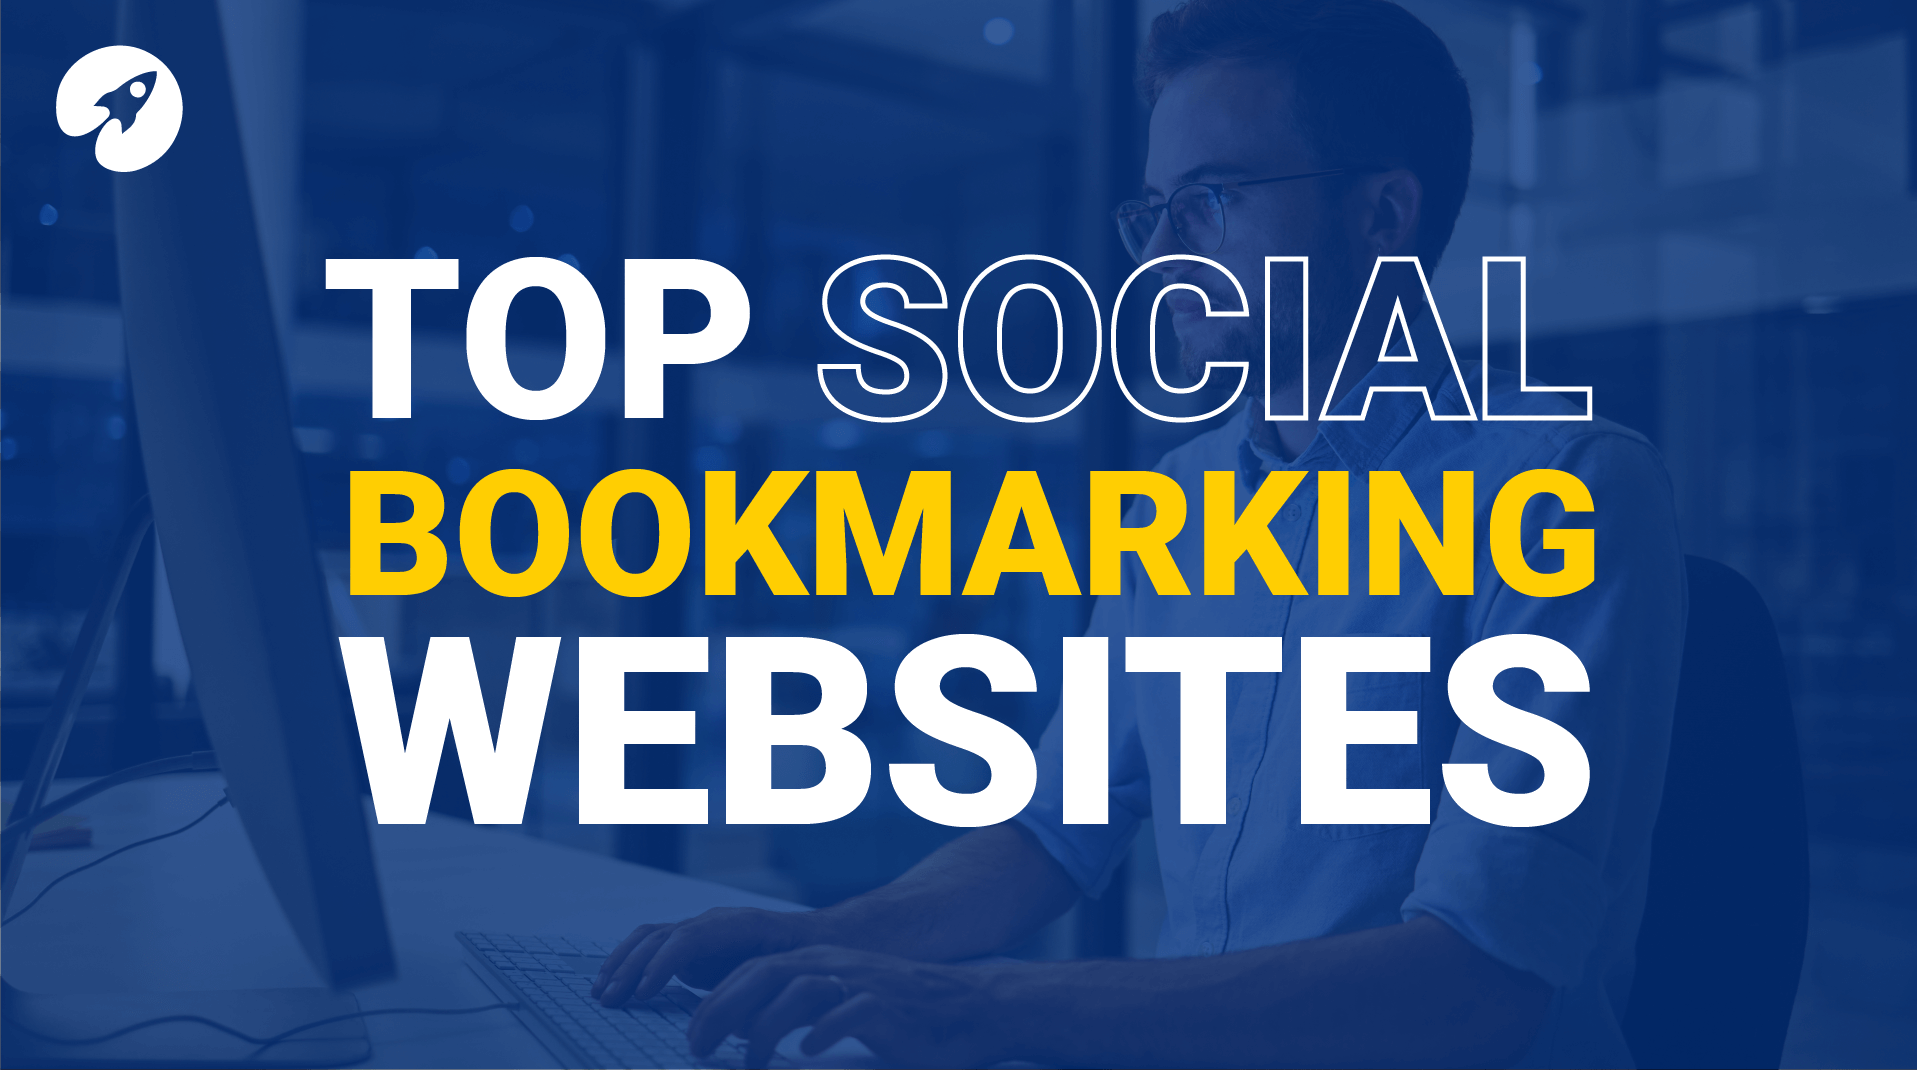 Top 20 Social Bookmarking Sites That Can Improve SEO